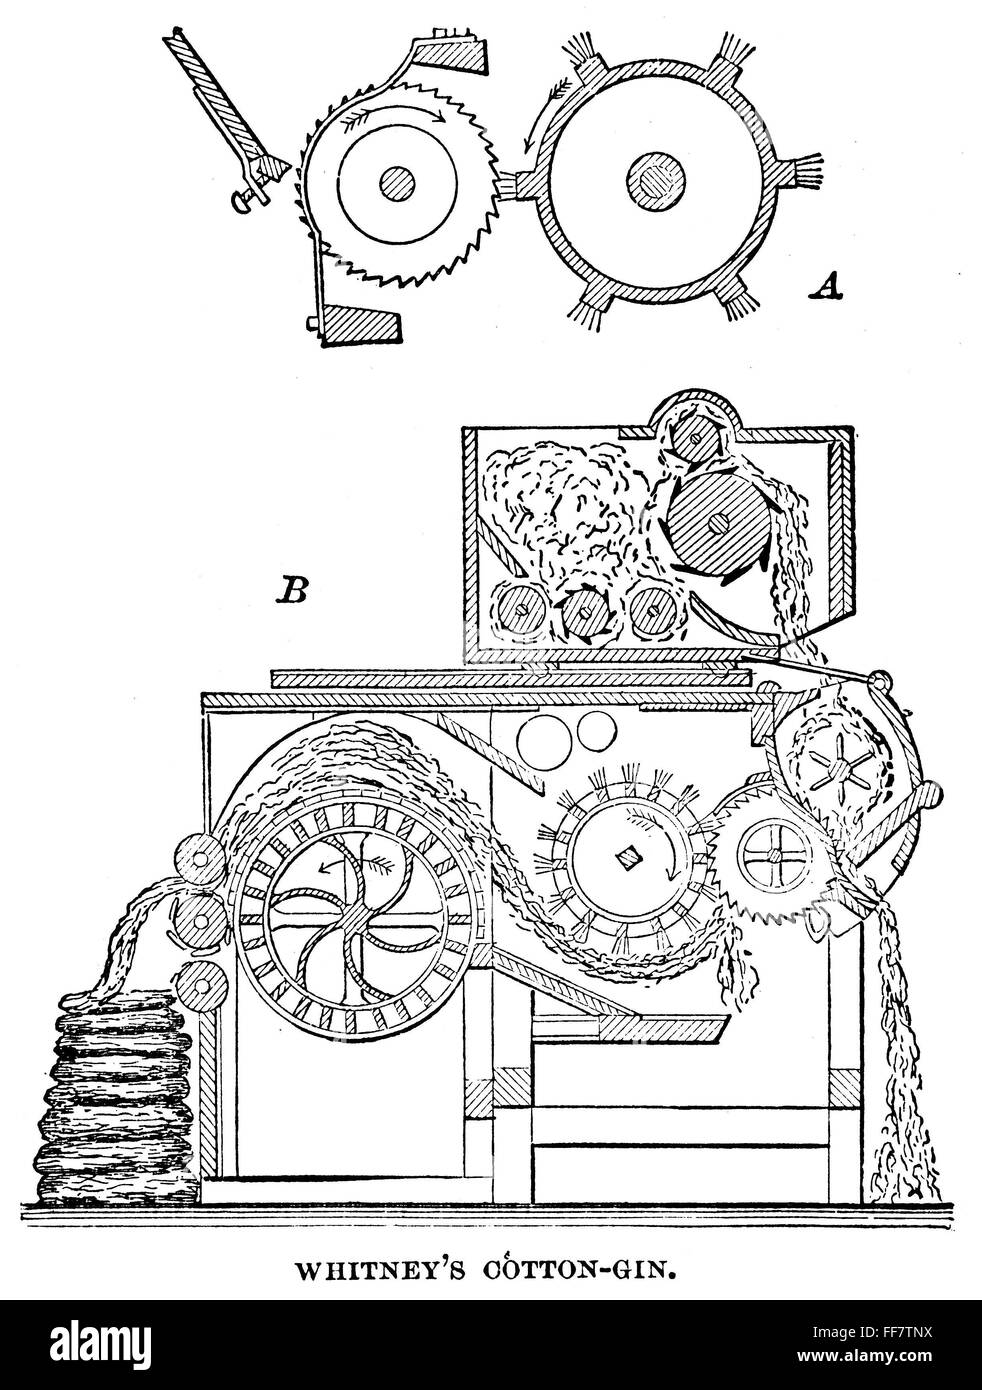 COTTON GIN. /nSchematic drawing of the mechanism of Eli Whitney's cotton gin. Stock Photo